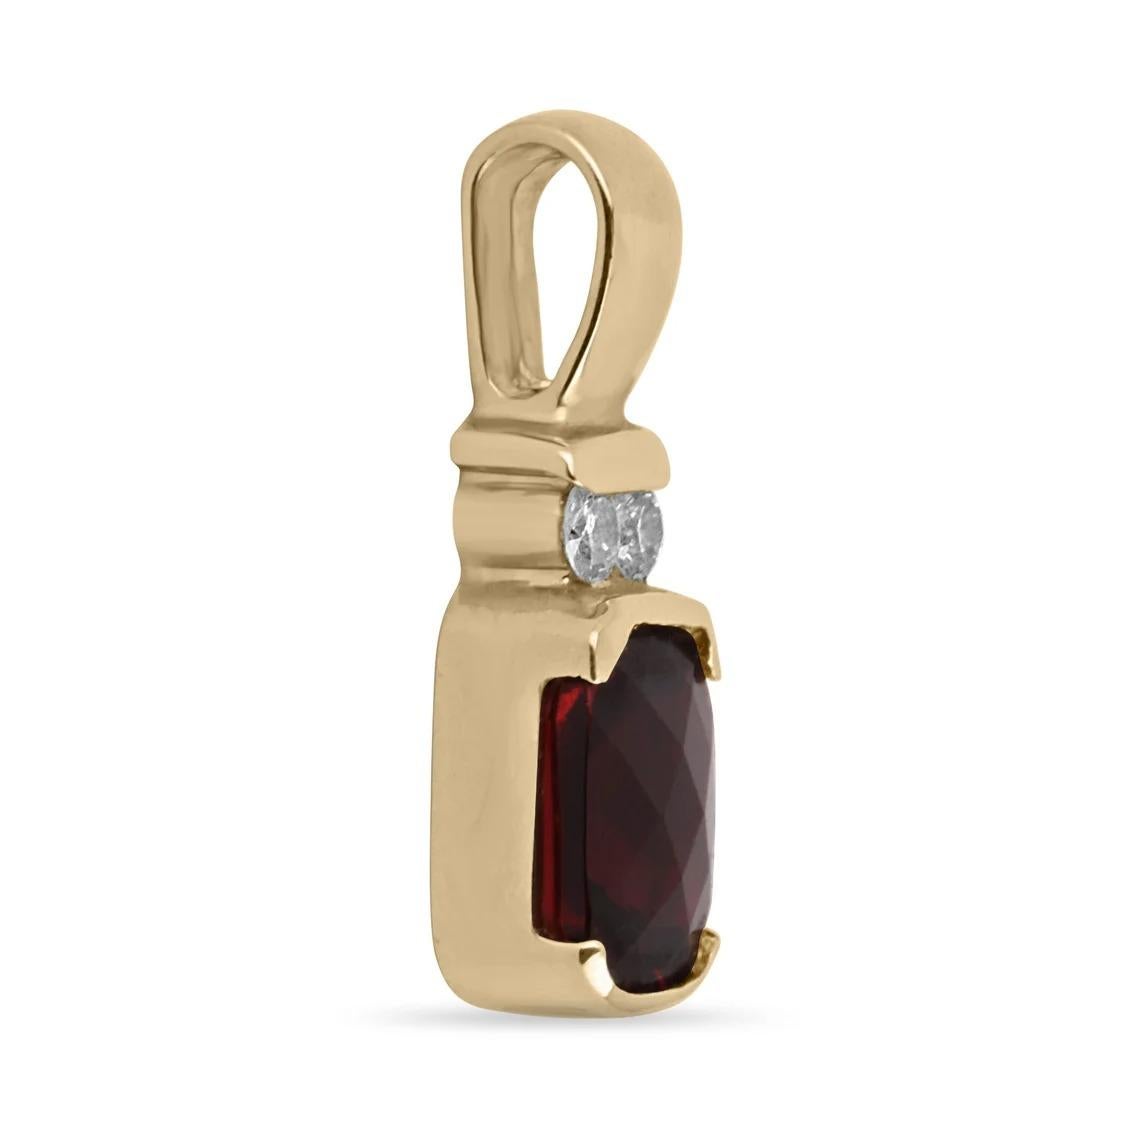 A stunning natural garnet & diamond accent pendant. This lovely piece features a natural 2.20-carat, radiant emerald-cut garnet with excellent qualities. Half bezel set, with two brilliant round, cut diamonds at the top accenting it. Crafted in